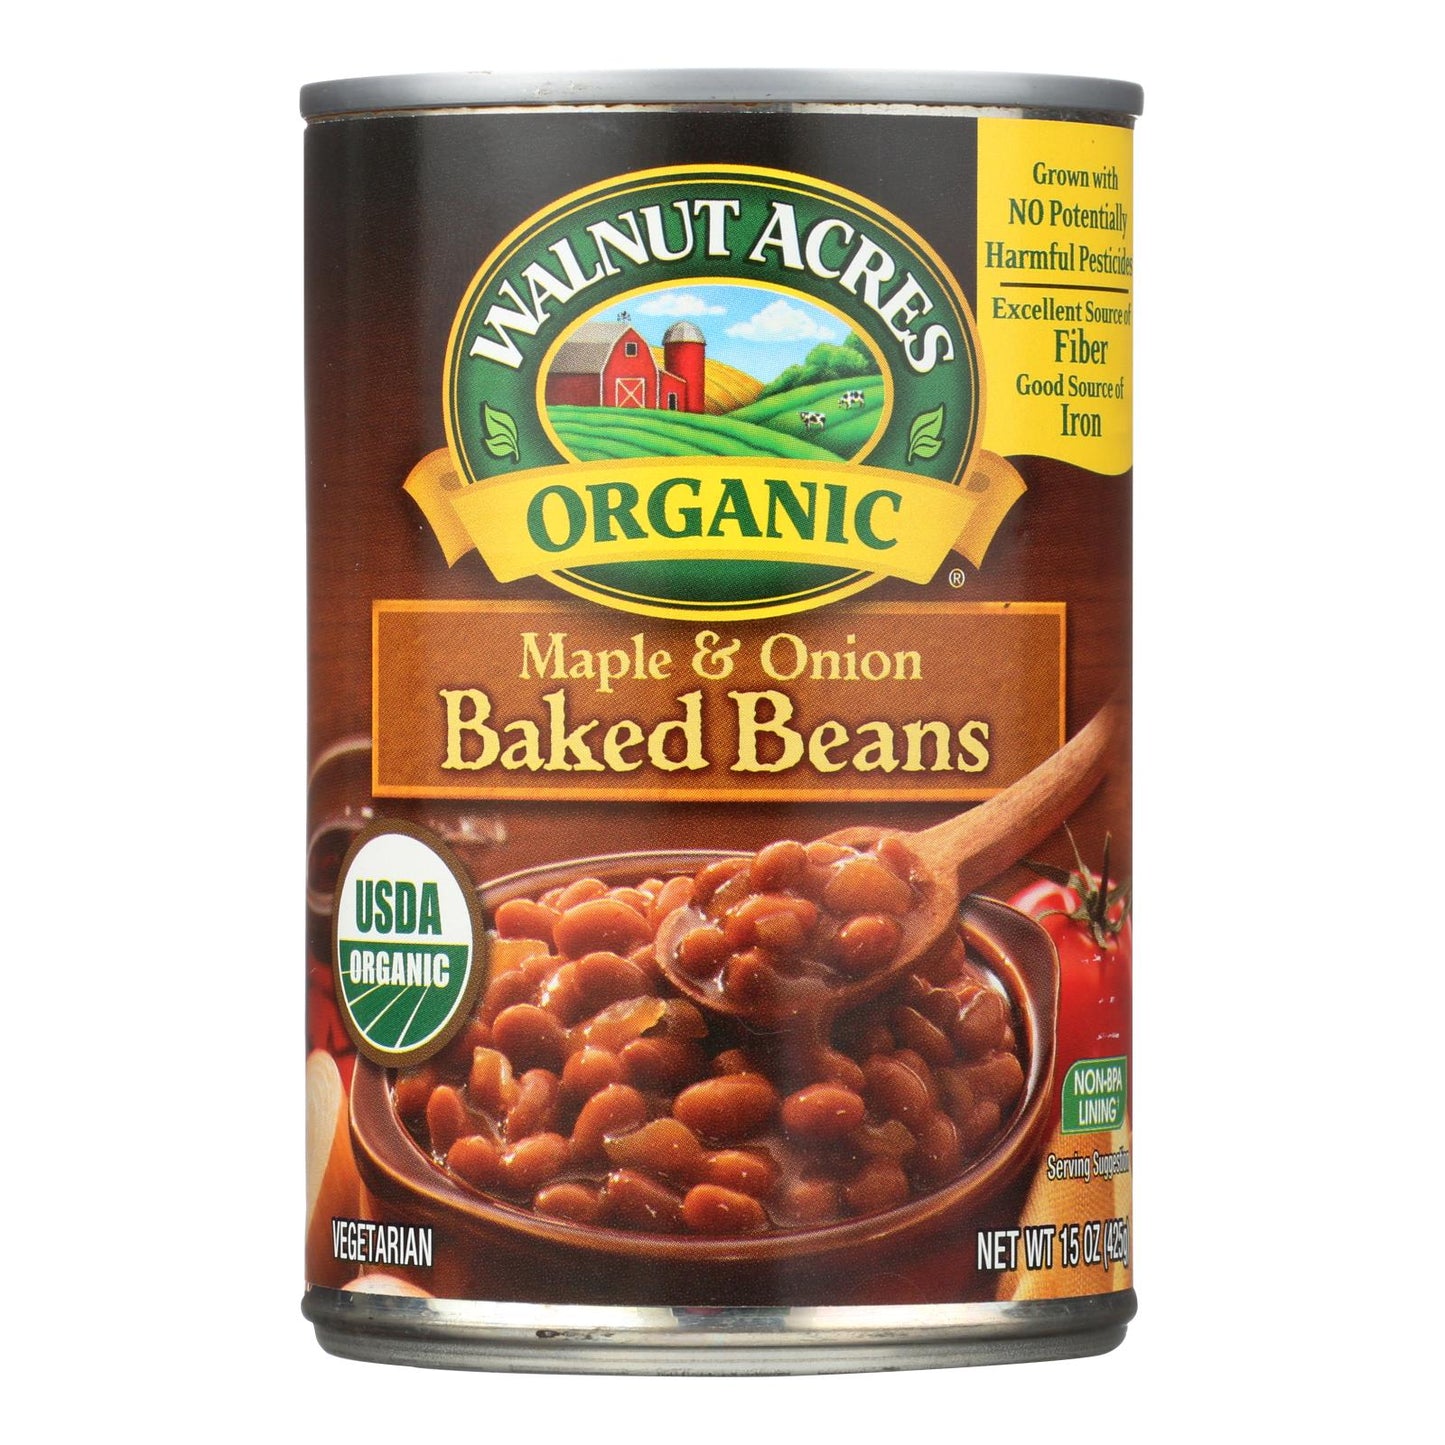 Walnut Acres Organic Baked Beans - Maple And Onion - Case Of 12 - 15 Oz.